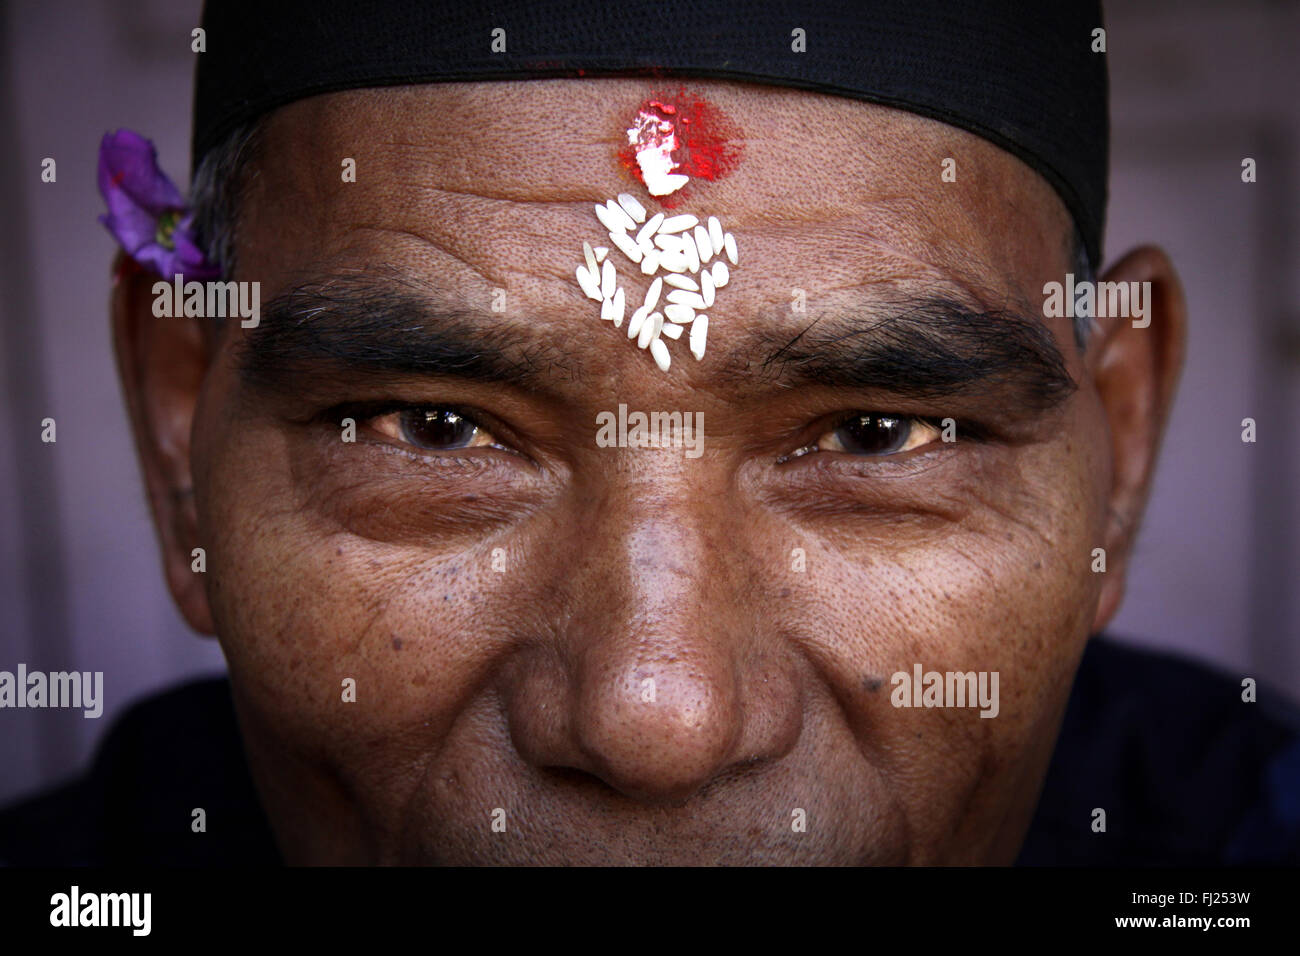 Portrait of Nepalese Newar man with tilak and rice grains on the forehead Stock Photo